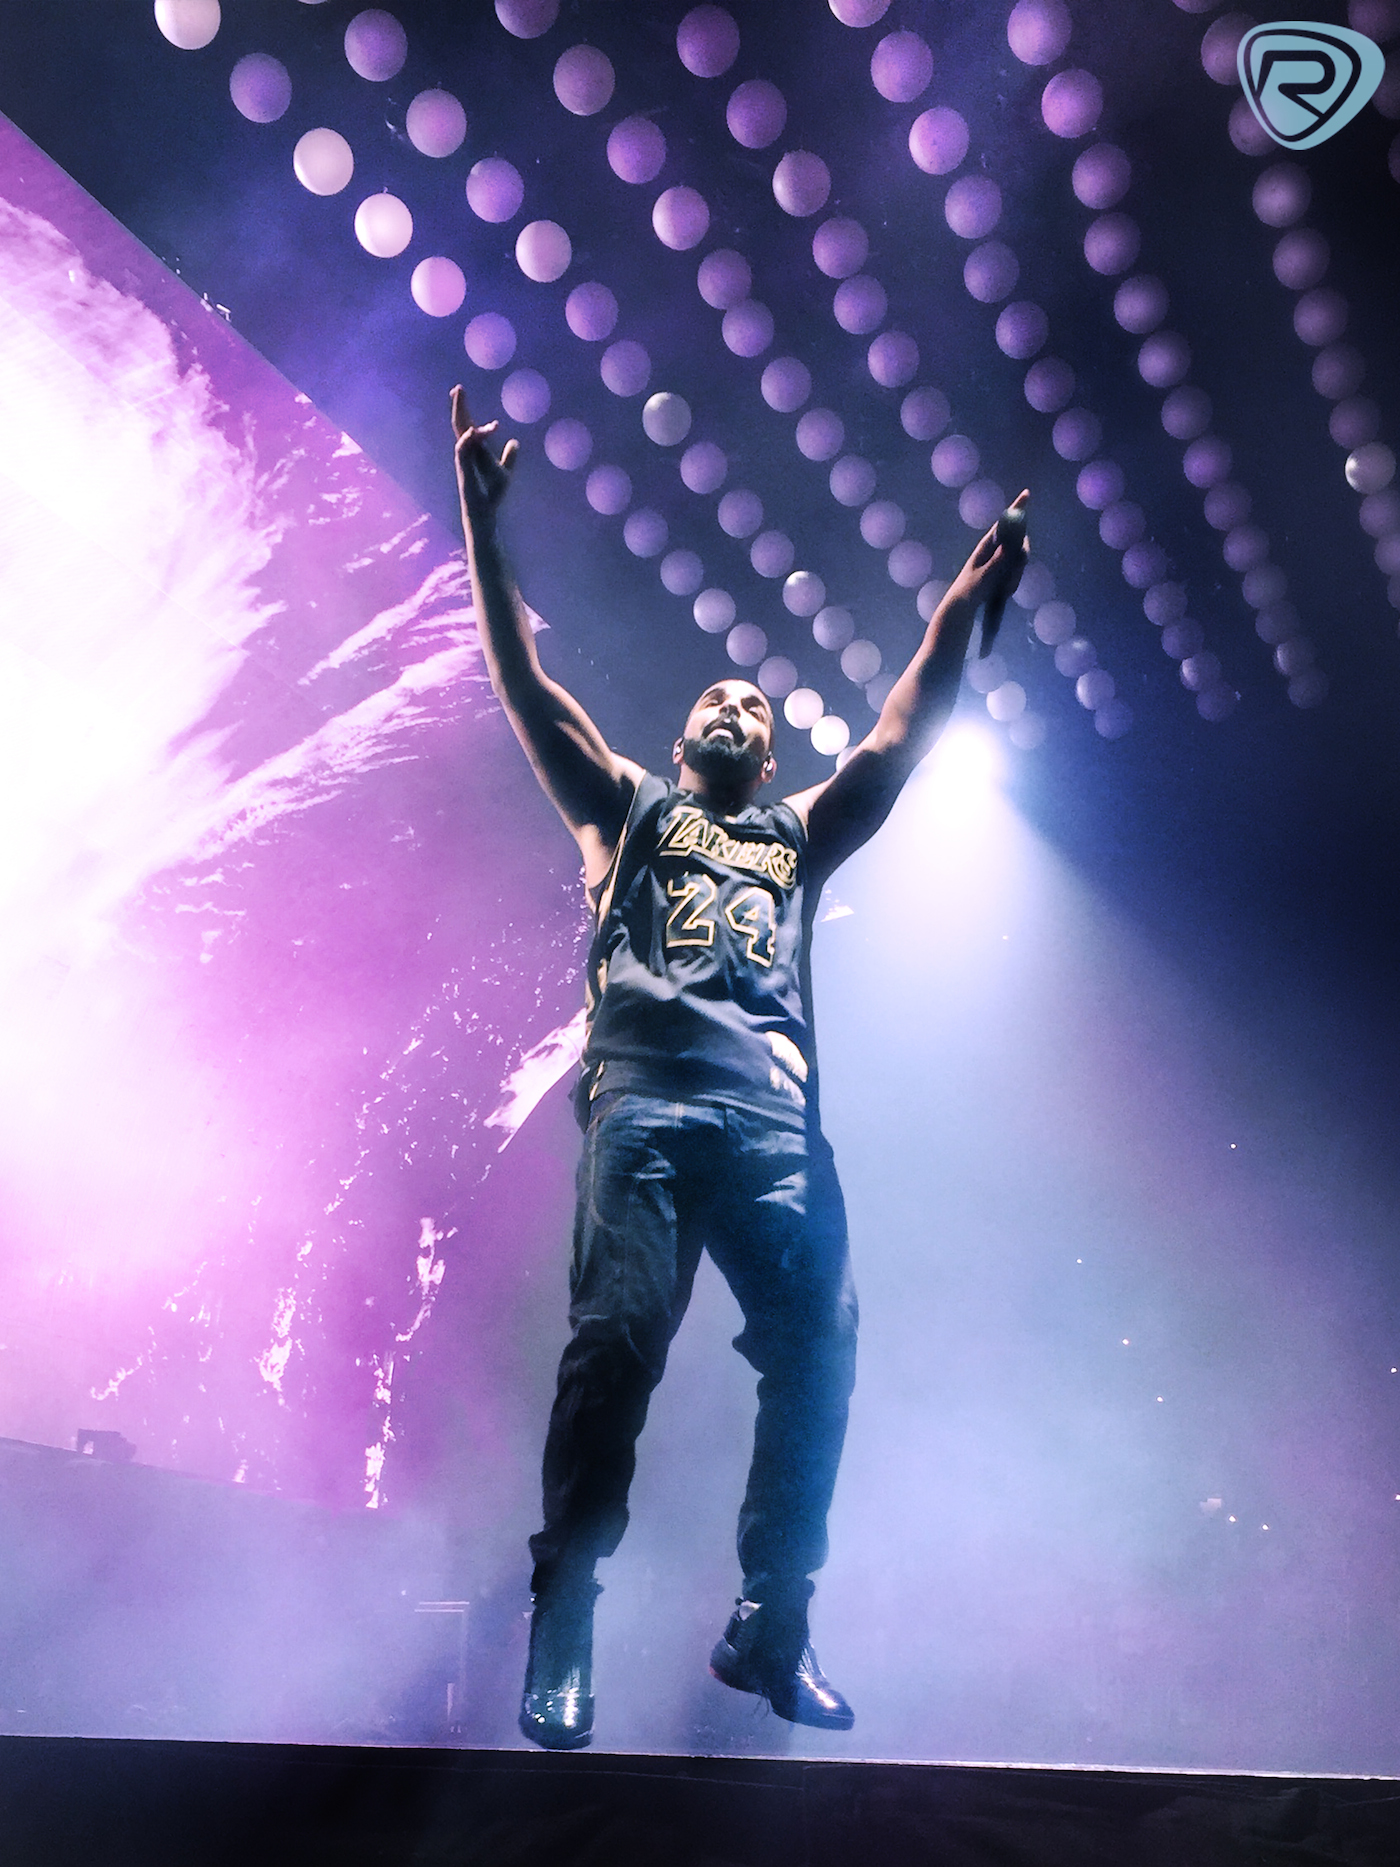 Drake & Future Summer '16Los Angeles Concert of the Year